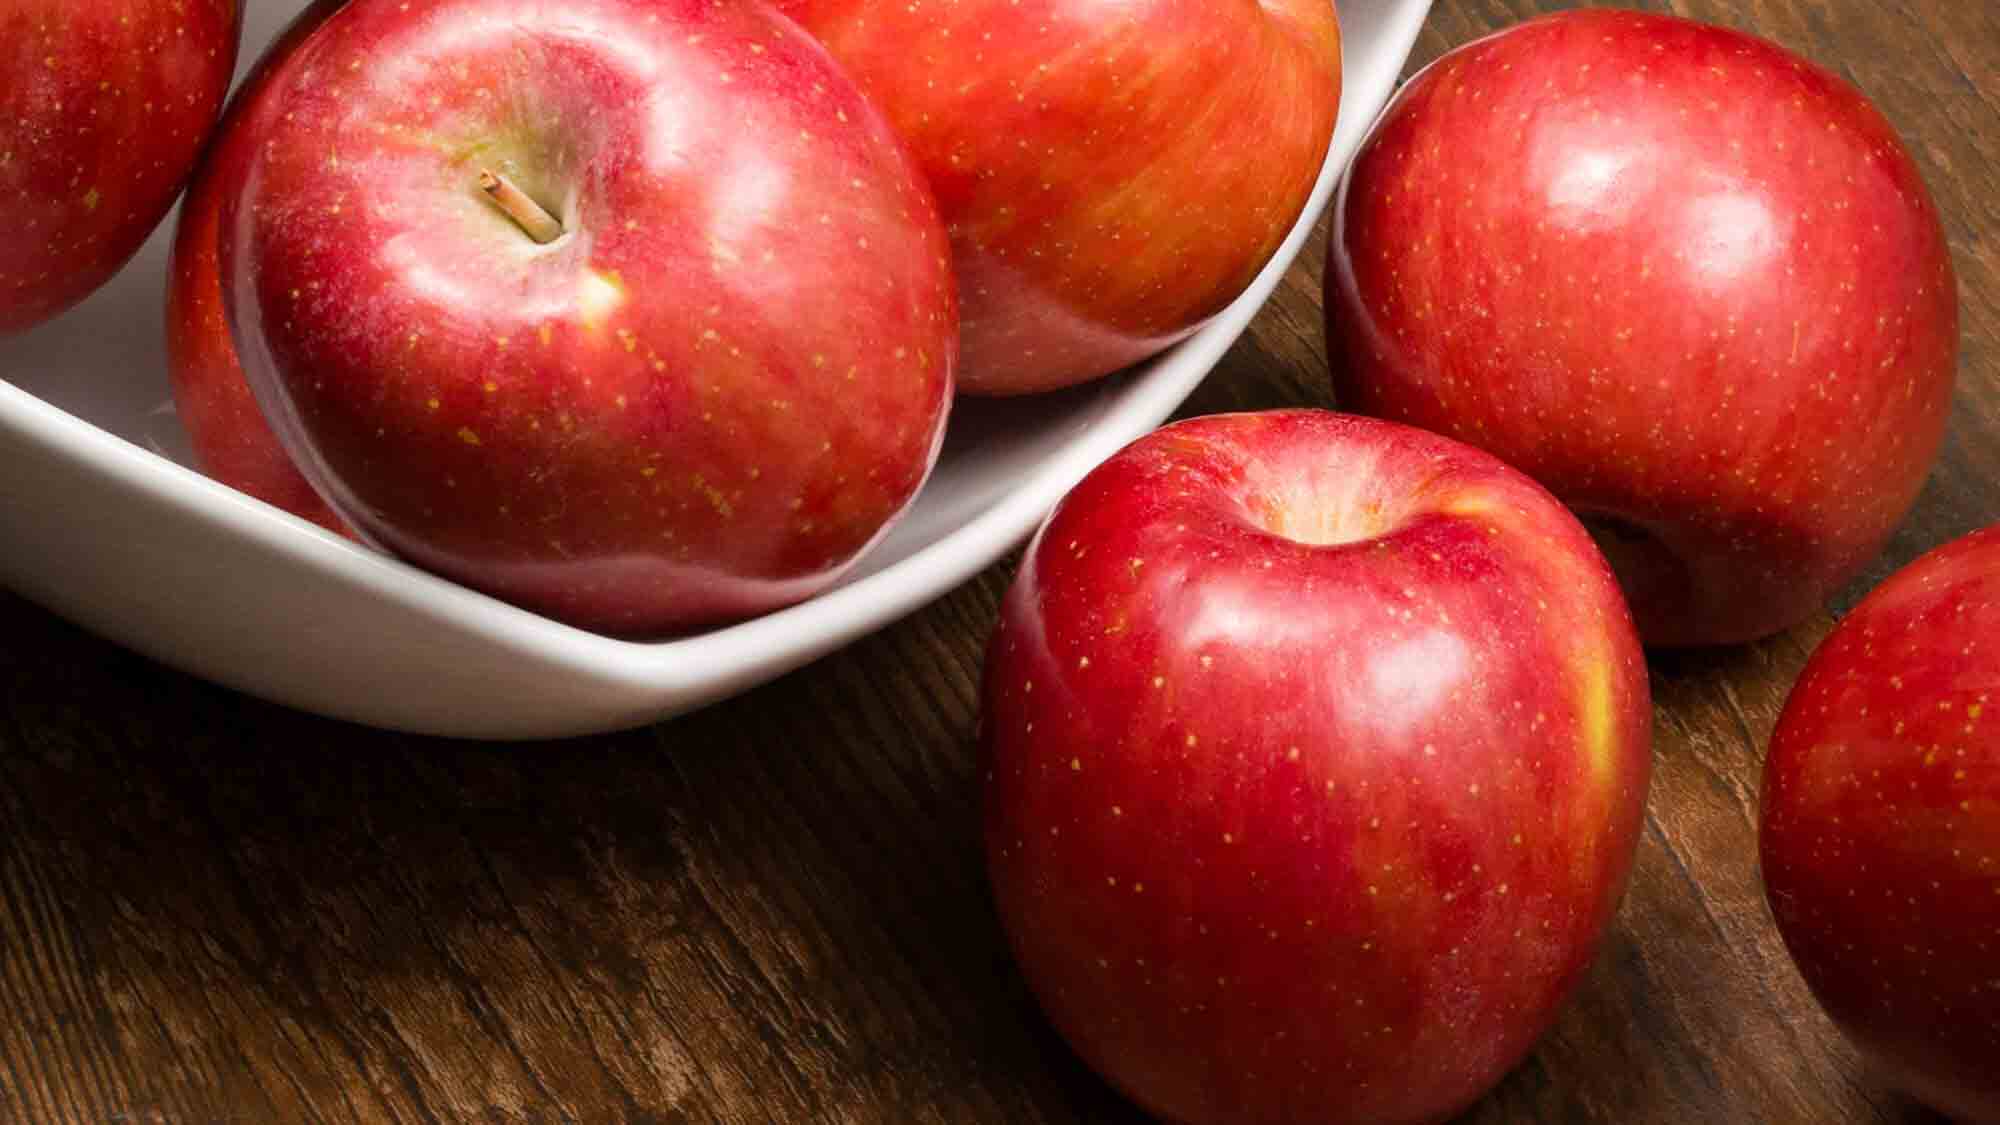 gala and Fuji red apples | Buy at a cheap price